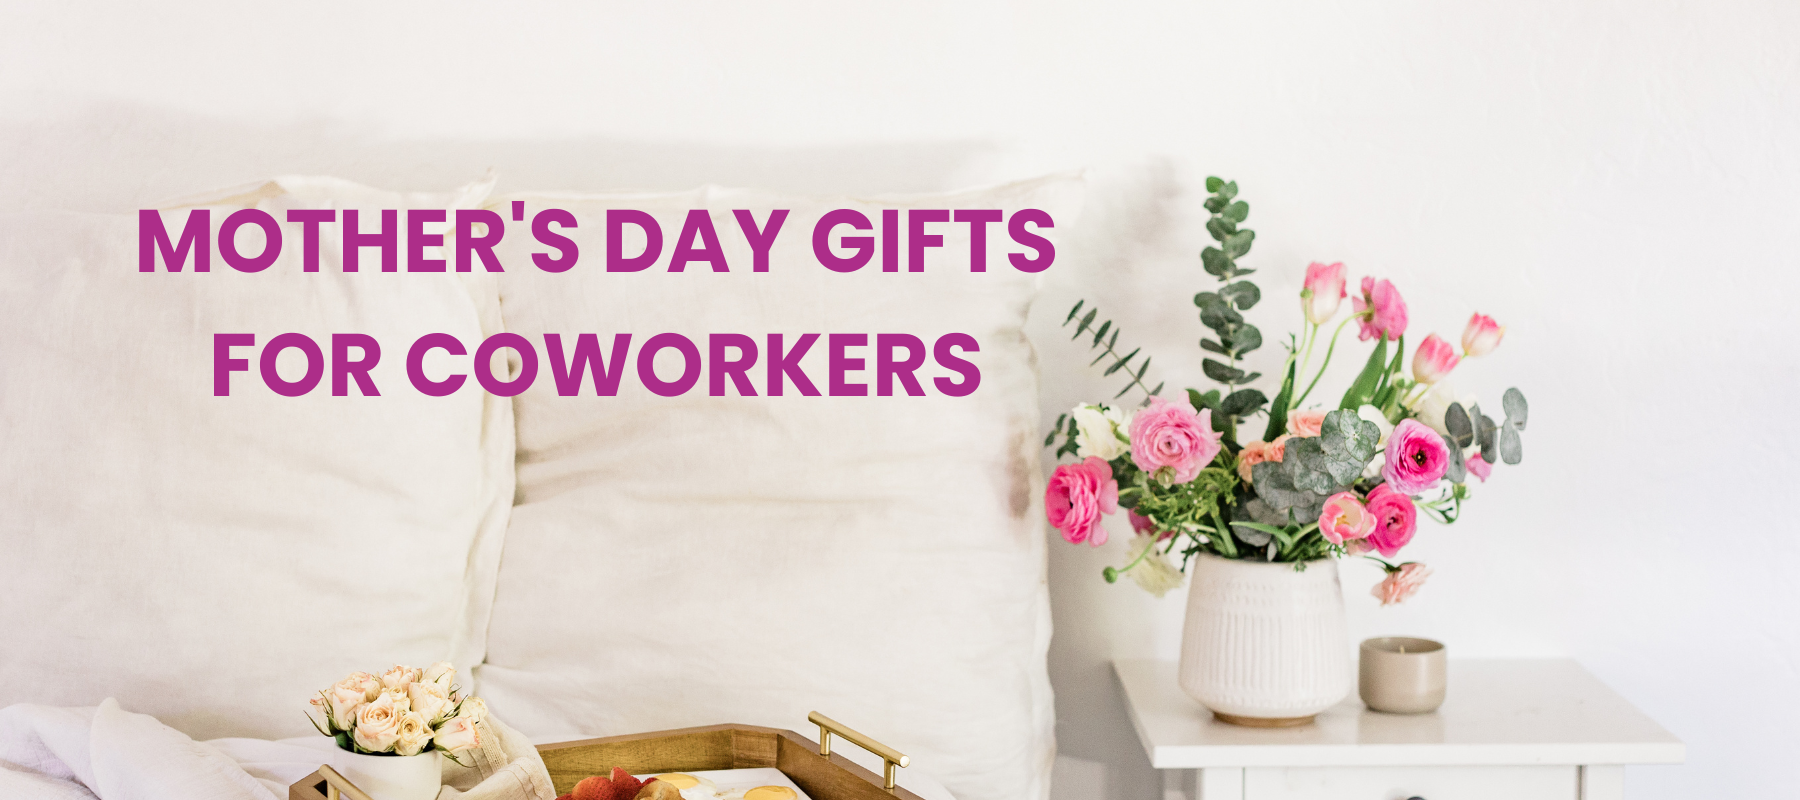 Mother's Day gifts for coworkers